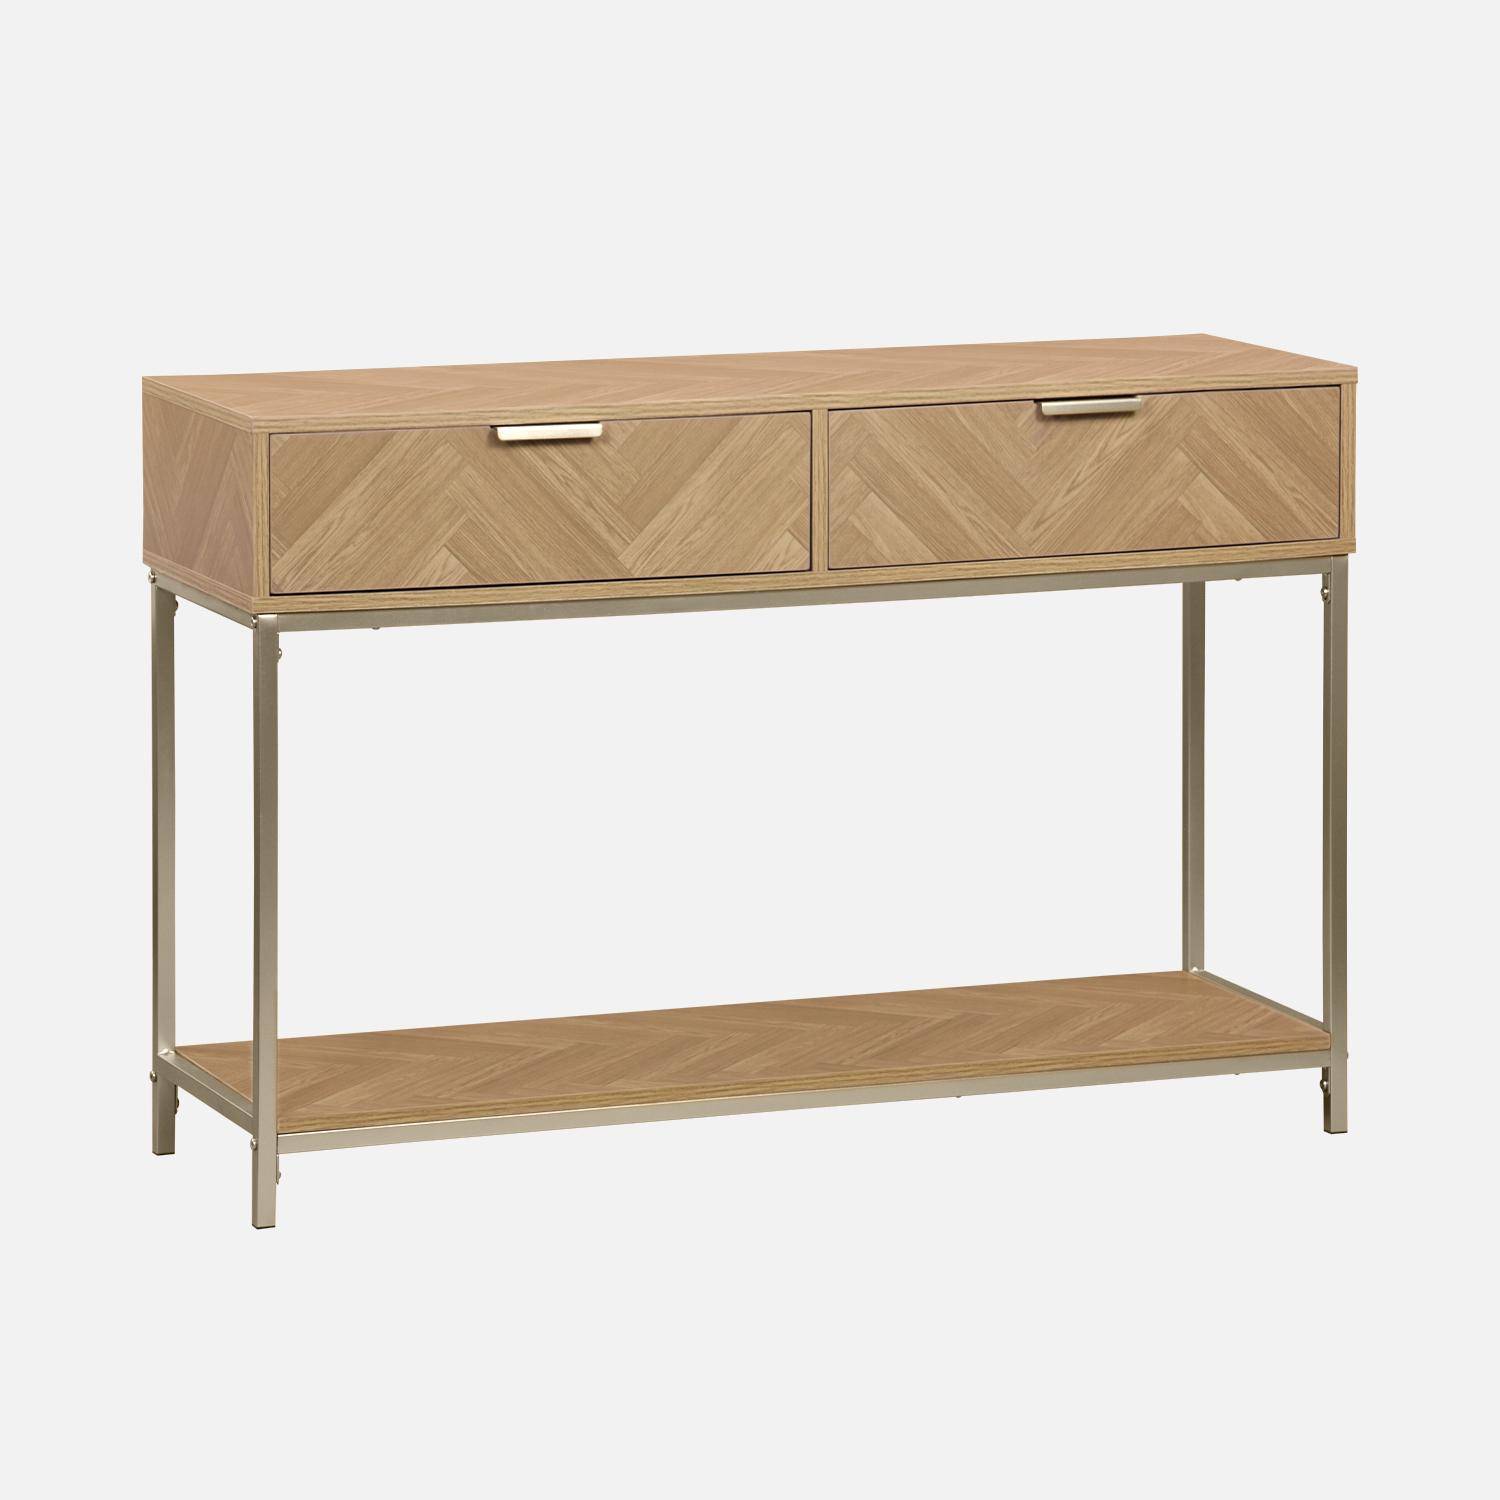 Herringbone hallway console table with 2 drawers, 110x35x75cm - Budapest - Natural Photo3